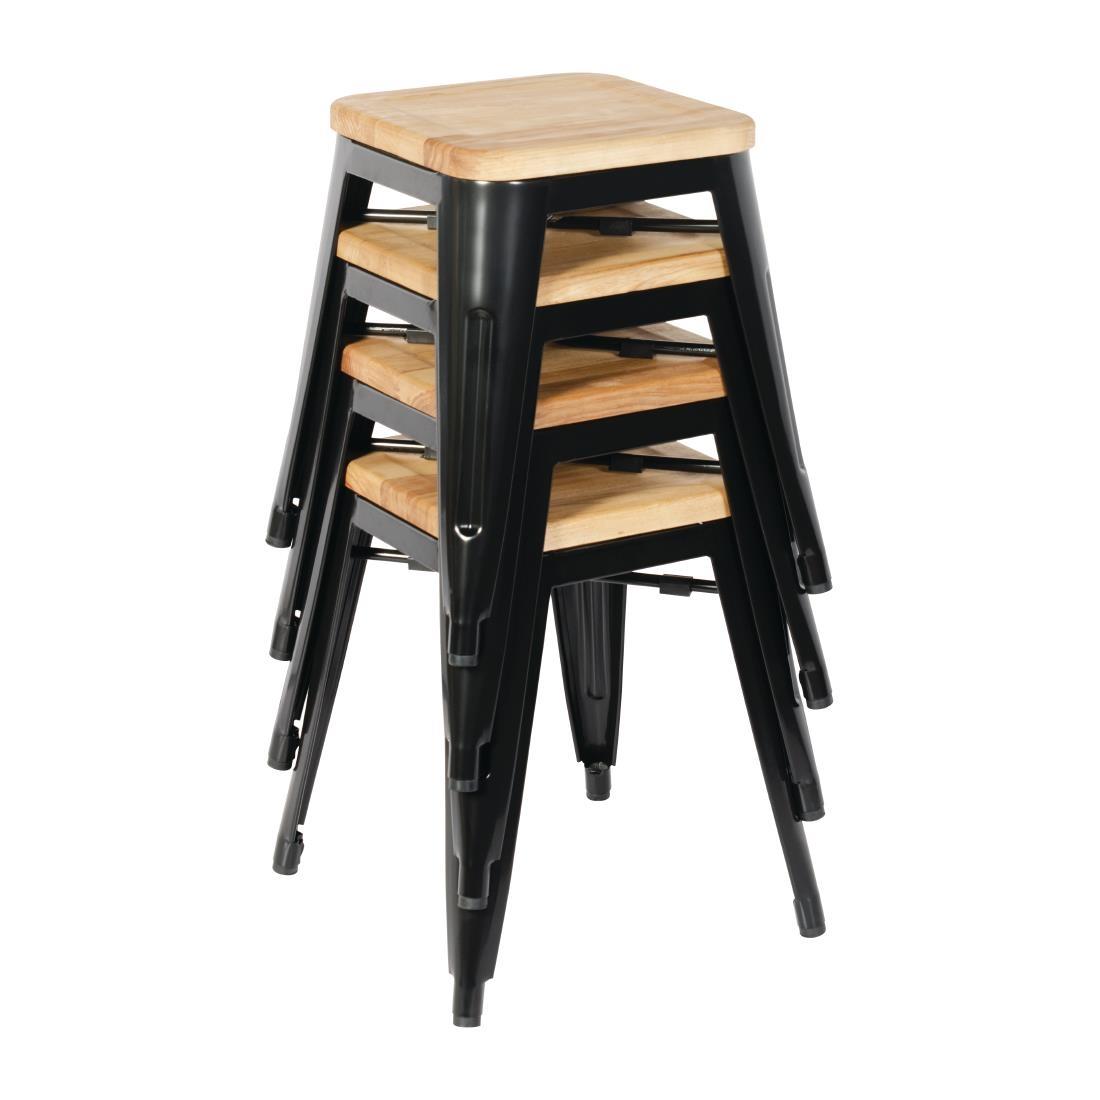 Bolero Bistro Low Stools with Wooden Seat Pad Black (Pack of 4) - GM635  - 3